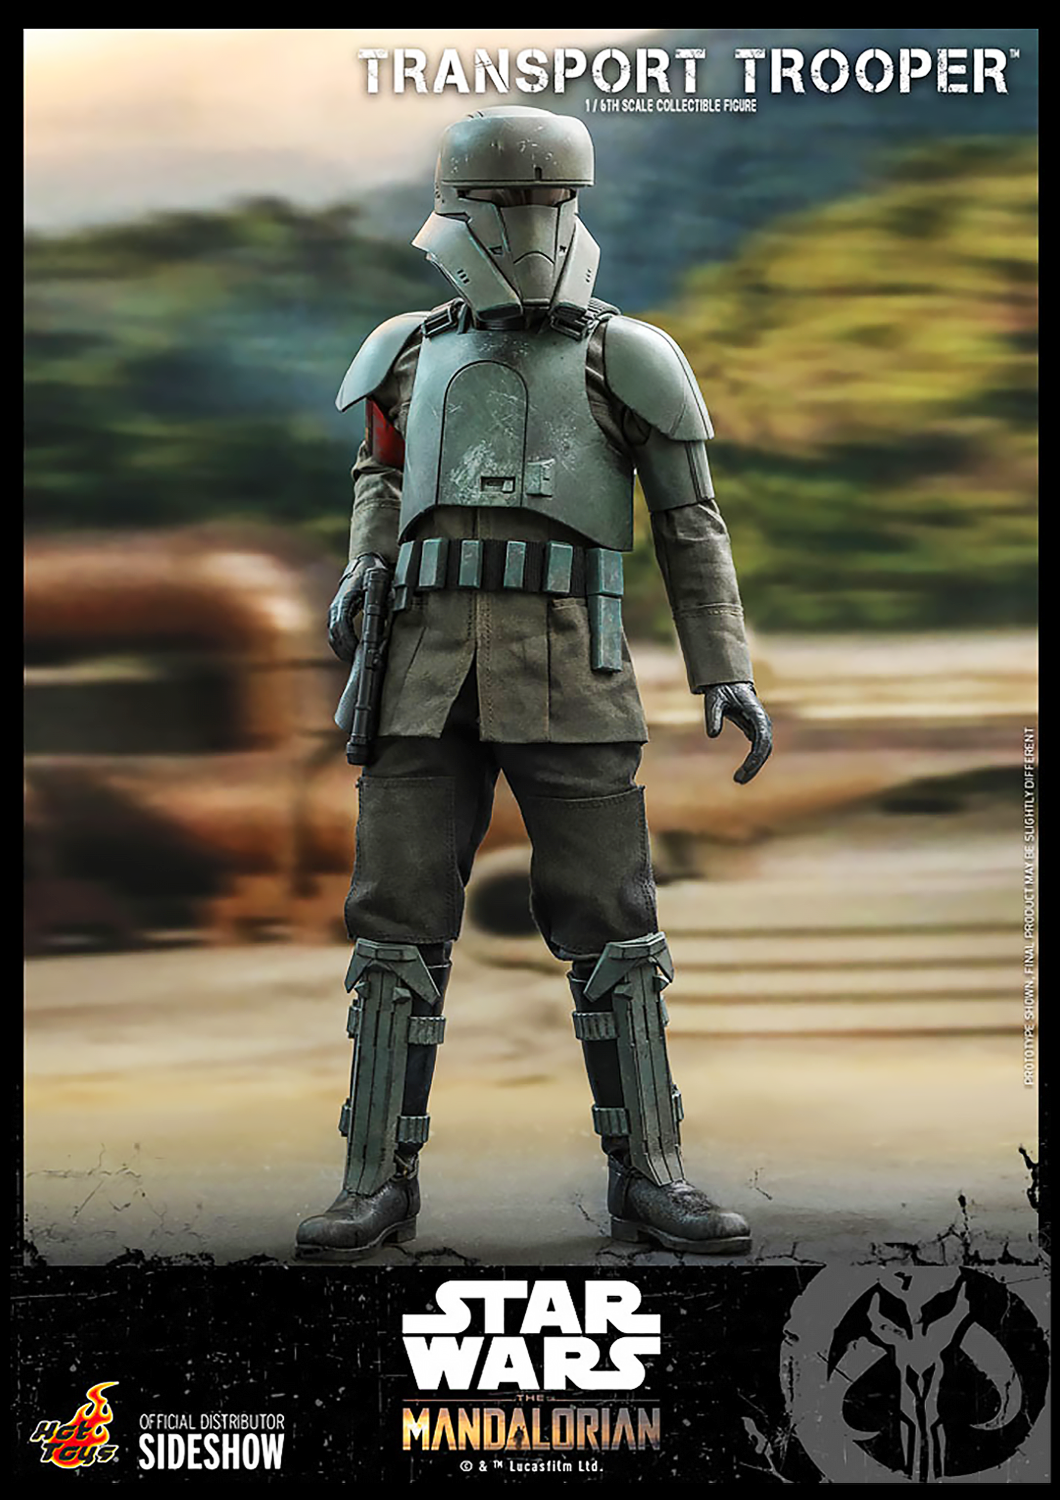 HOT TOYS STAR WARS: THE MANDALORIAN TRANSPORT TROOPER 1/6TH SCALE TMS030 - Anotoys Collectibles